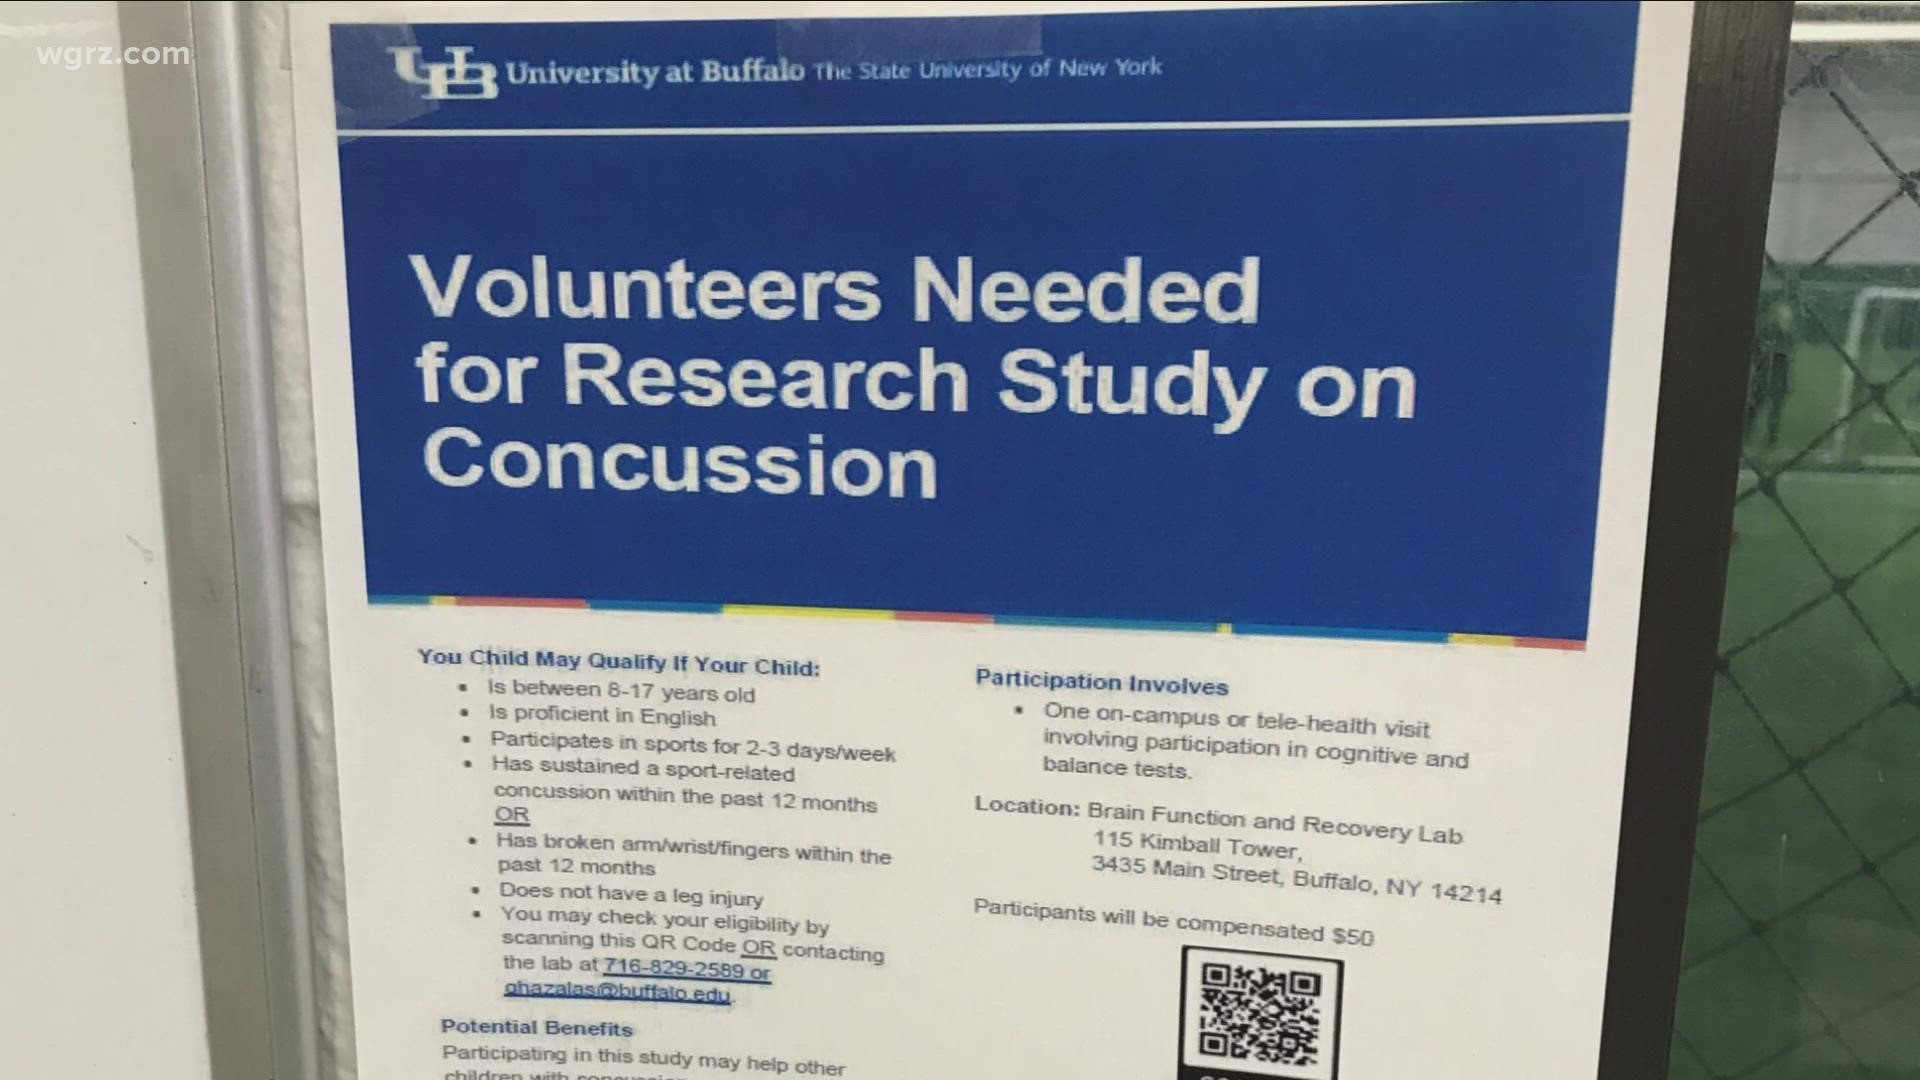 Inside UB's Brain Function and Recovery Lab, researchers are delving deeper into the impacts of concussions.